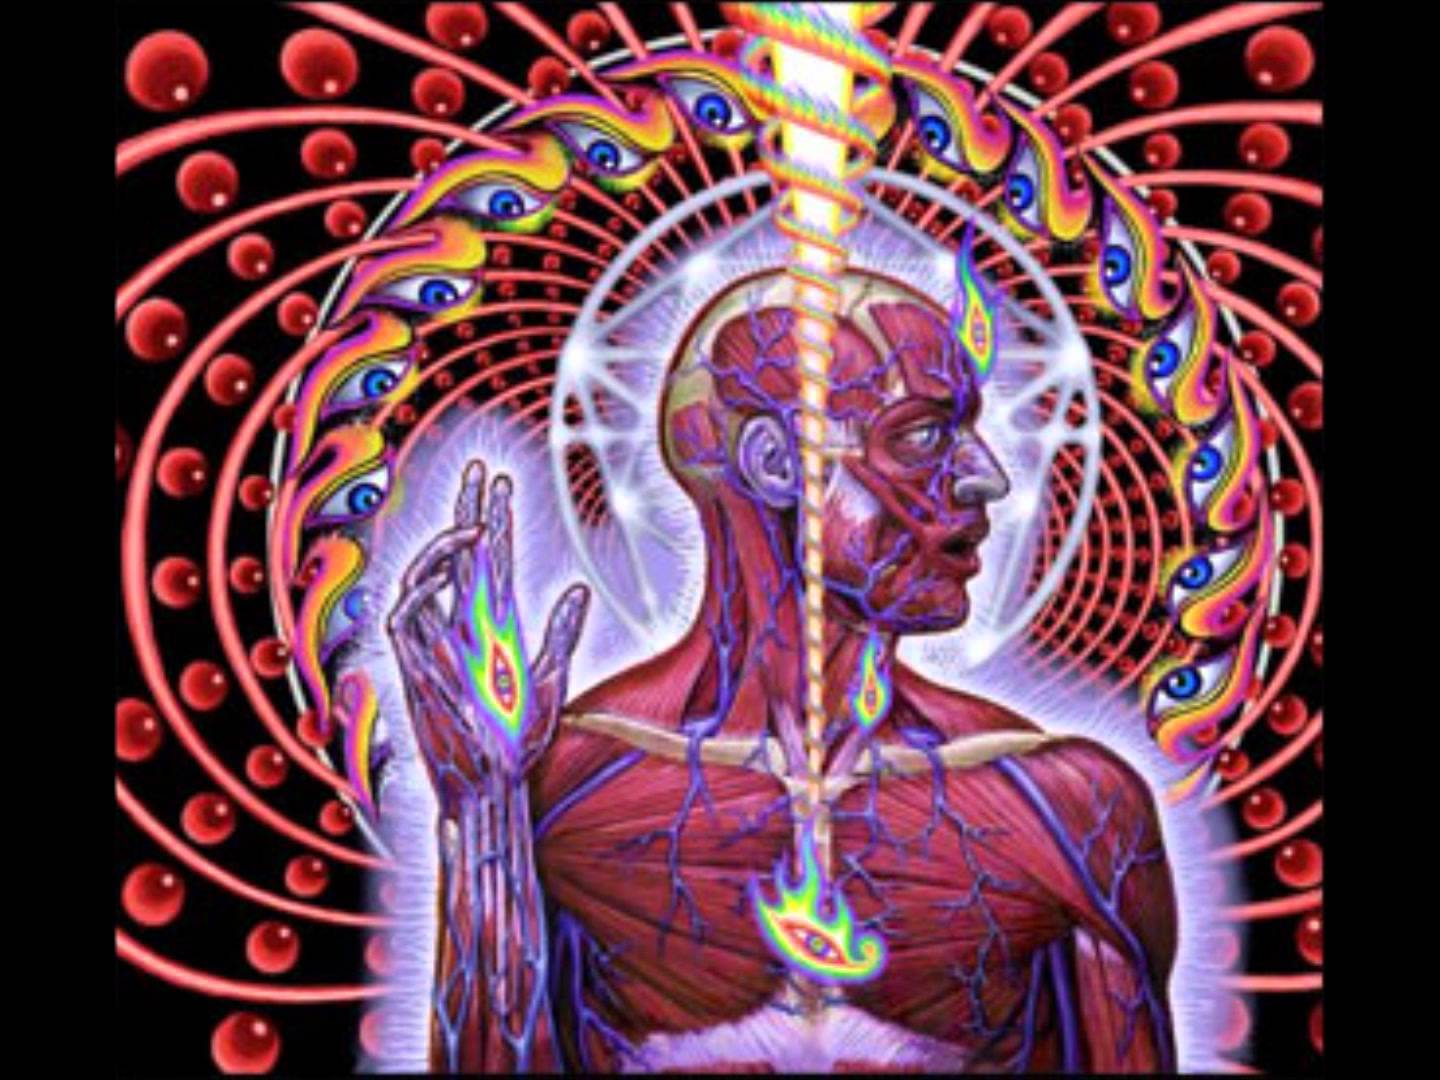 Tool Lateralus Wallpaper Posted By Samantha